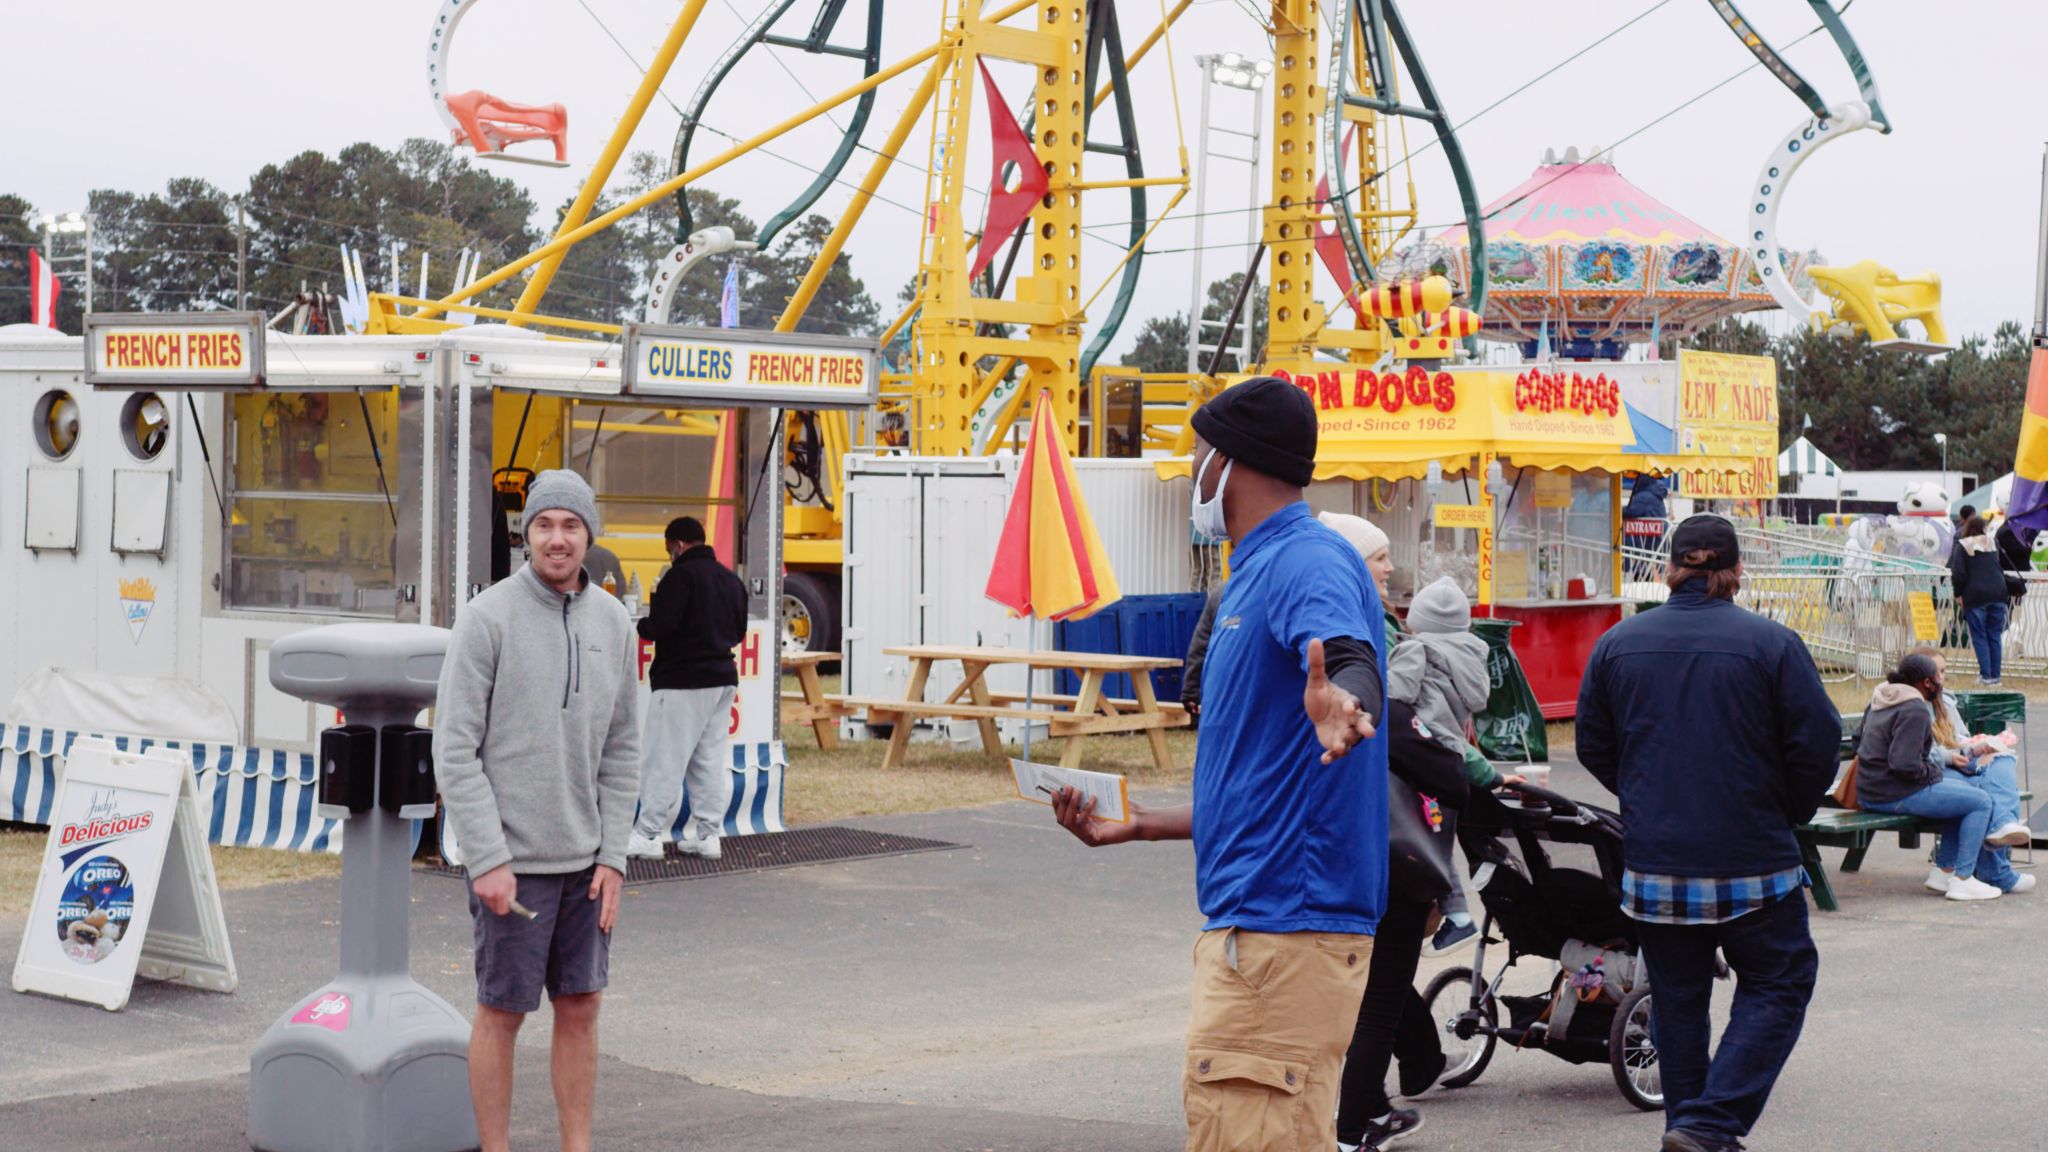 Man wearing a gray knit cap, sweatshirt and shorts smiling for the camera at a fair with other people nearby